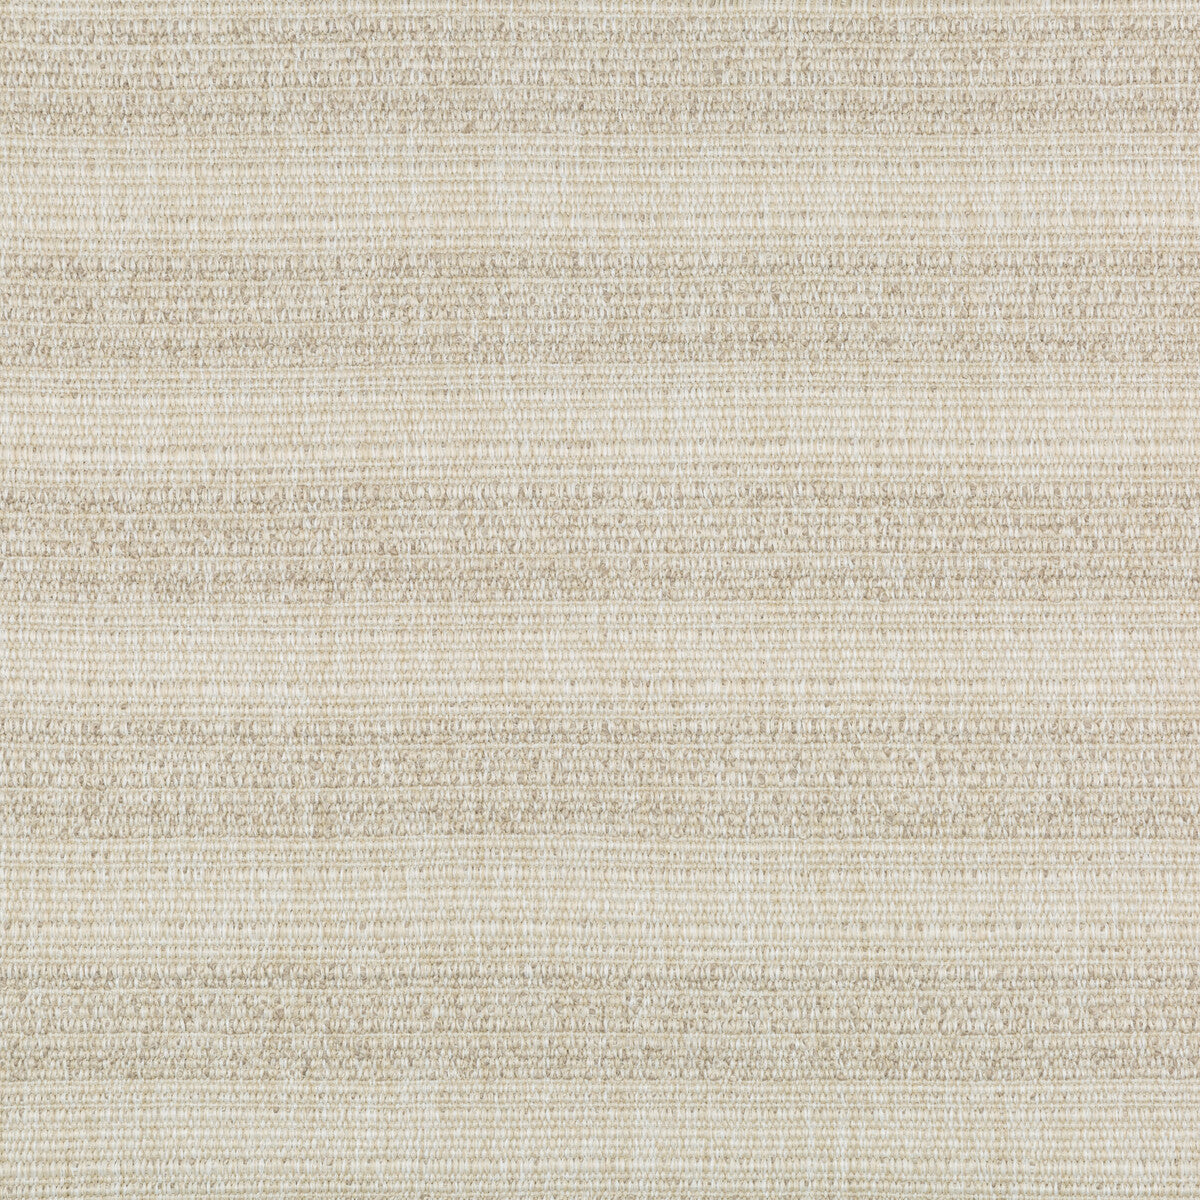 Maiden Voyage fabric in natural color - pattern 35920.116.0 - by Kravet Couture in the Vista collection